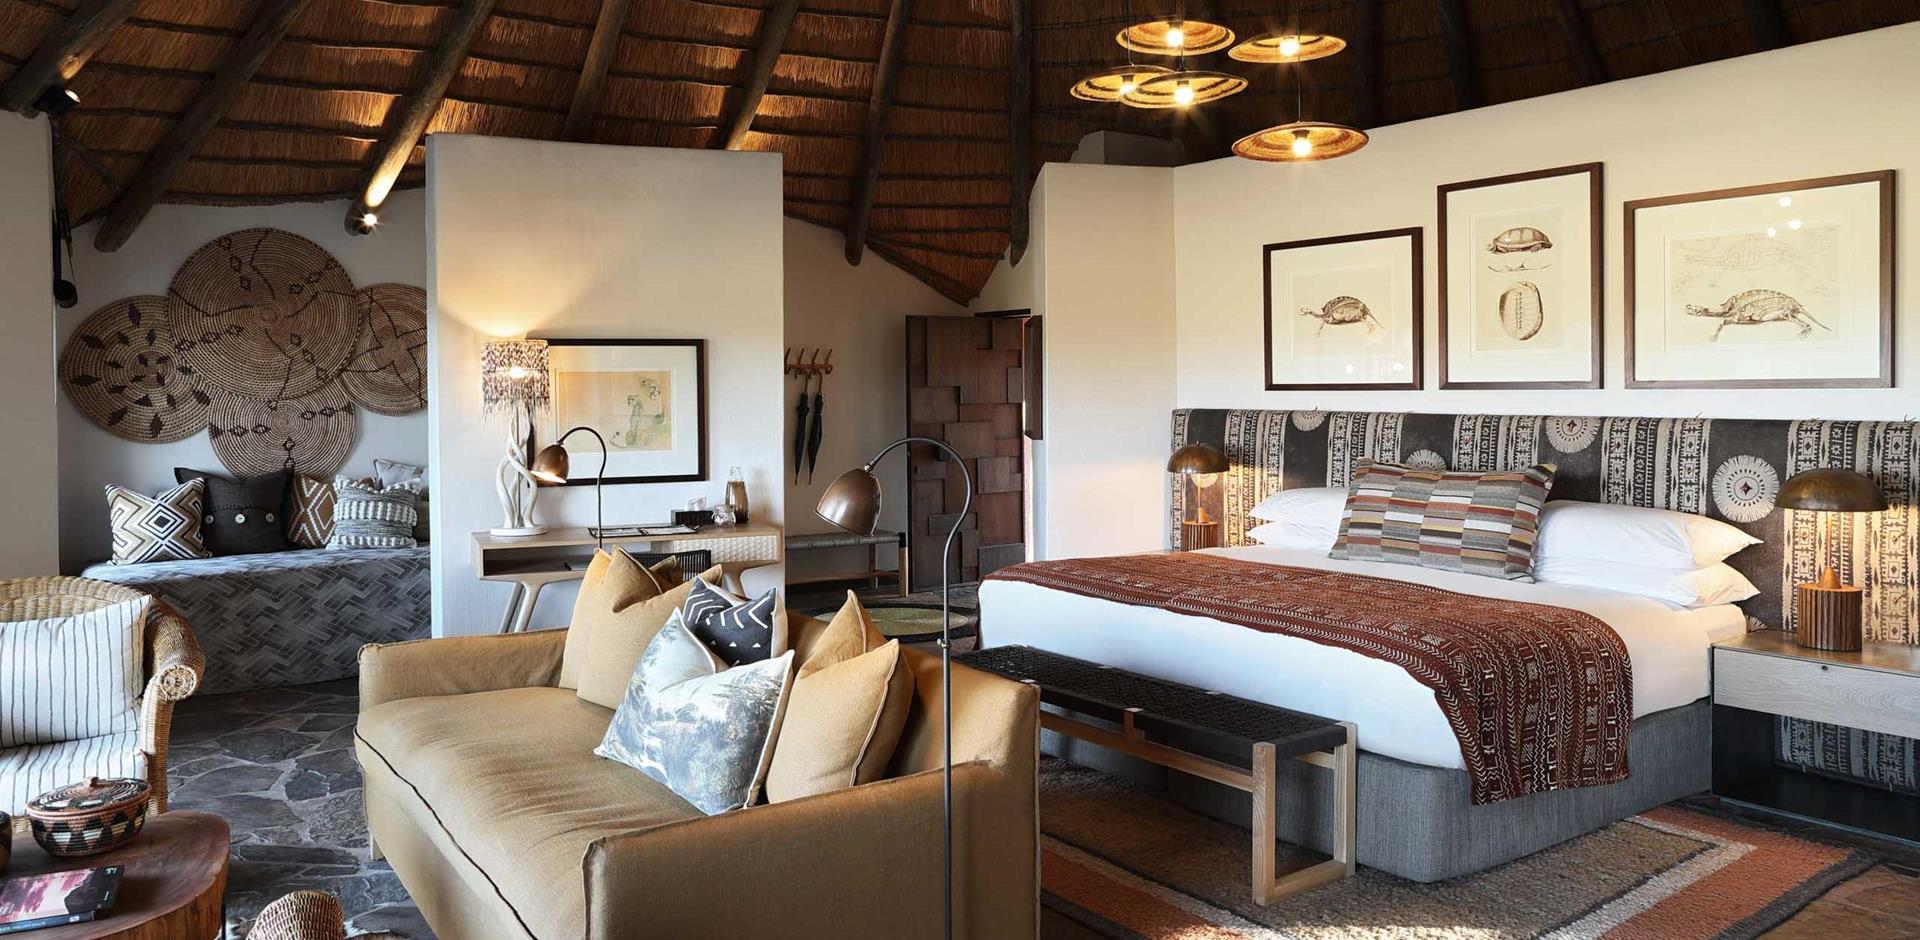 Suite, MalaMala, in South Africa’s Kruger National Park